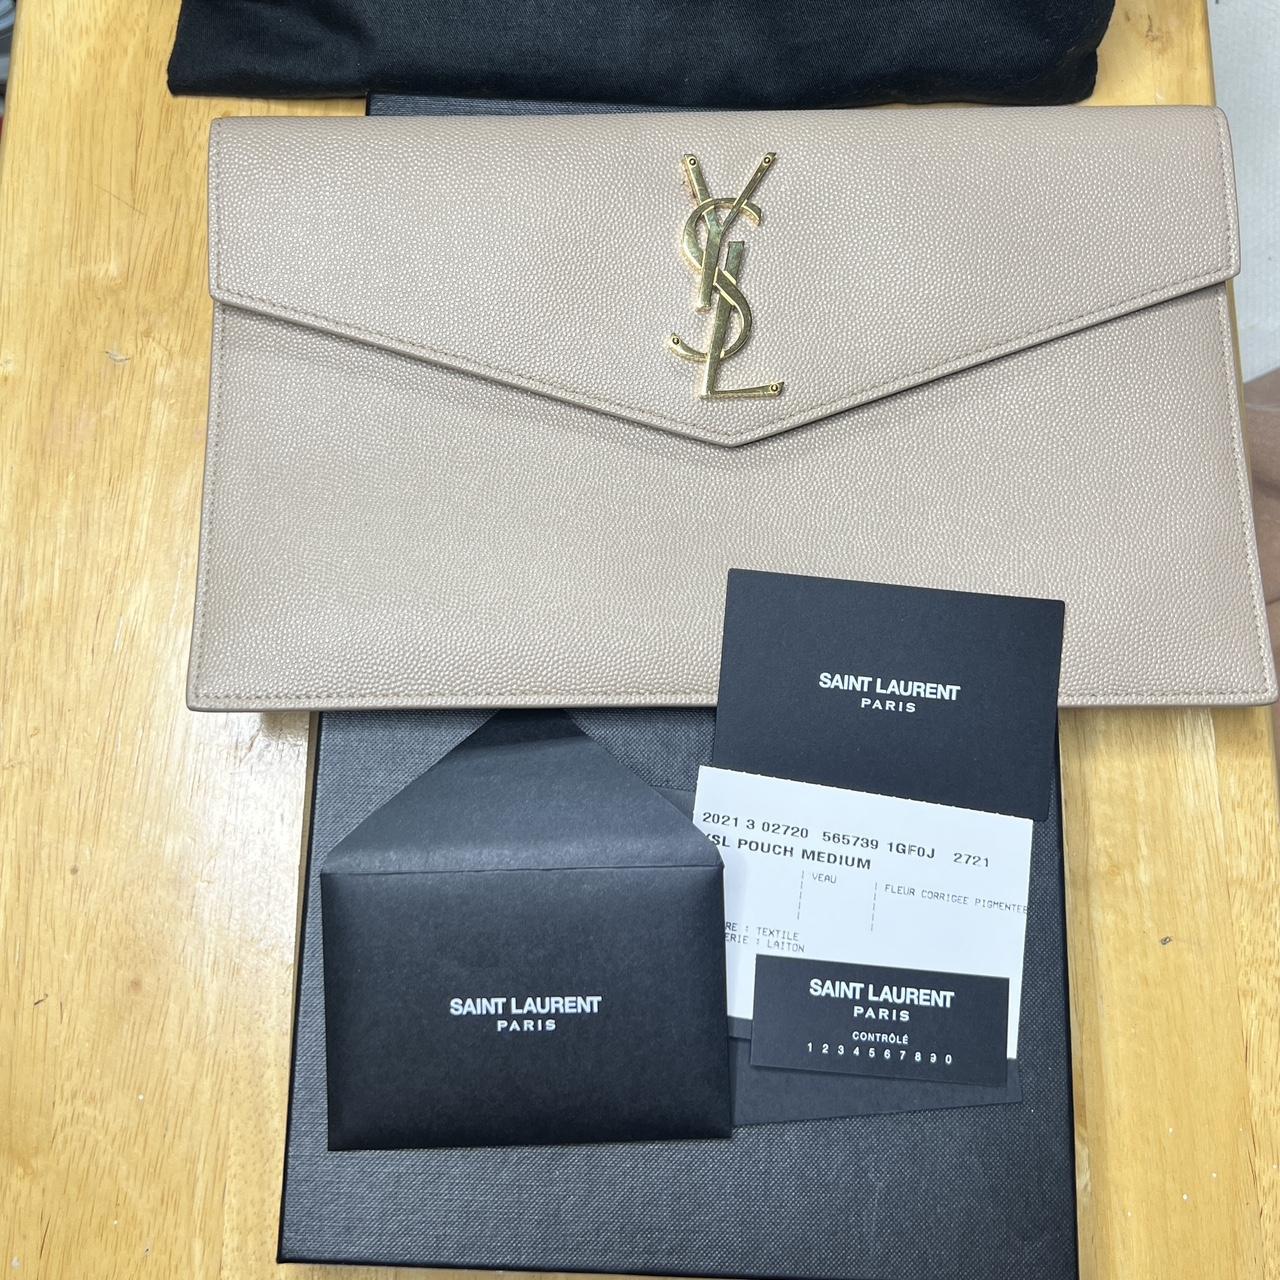 YSL beige tan clutch brand new comes with box and dustbag